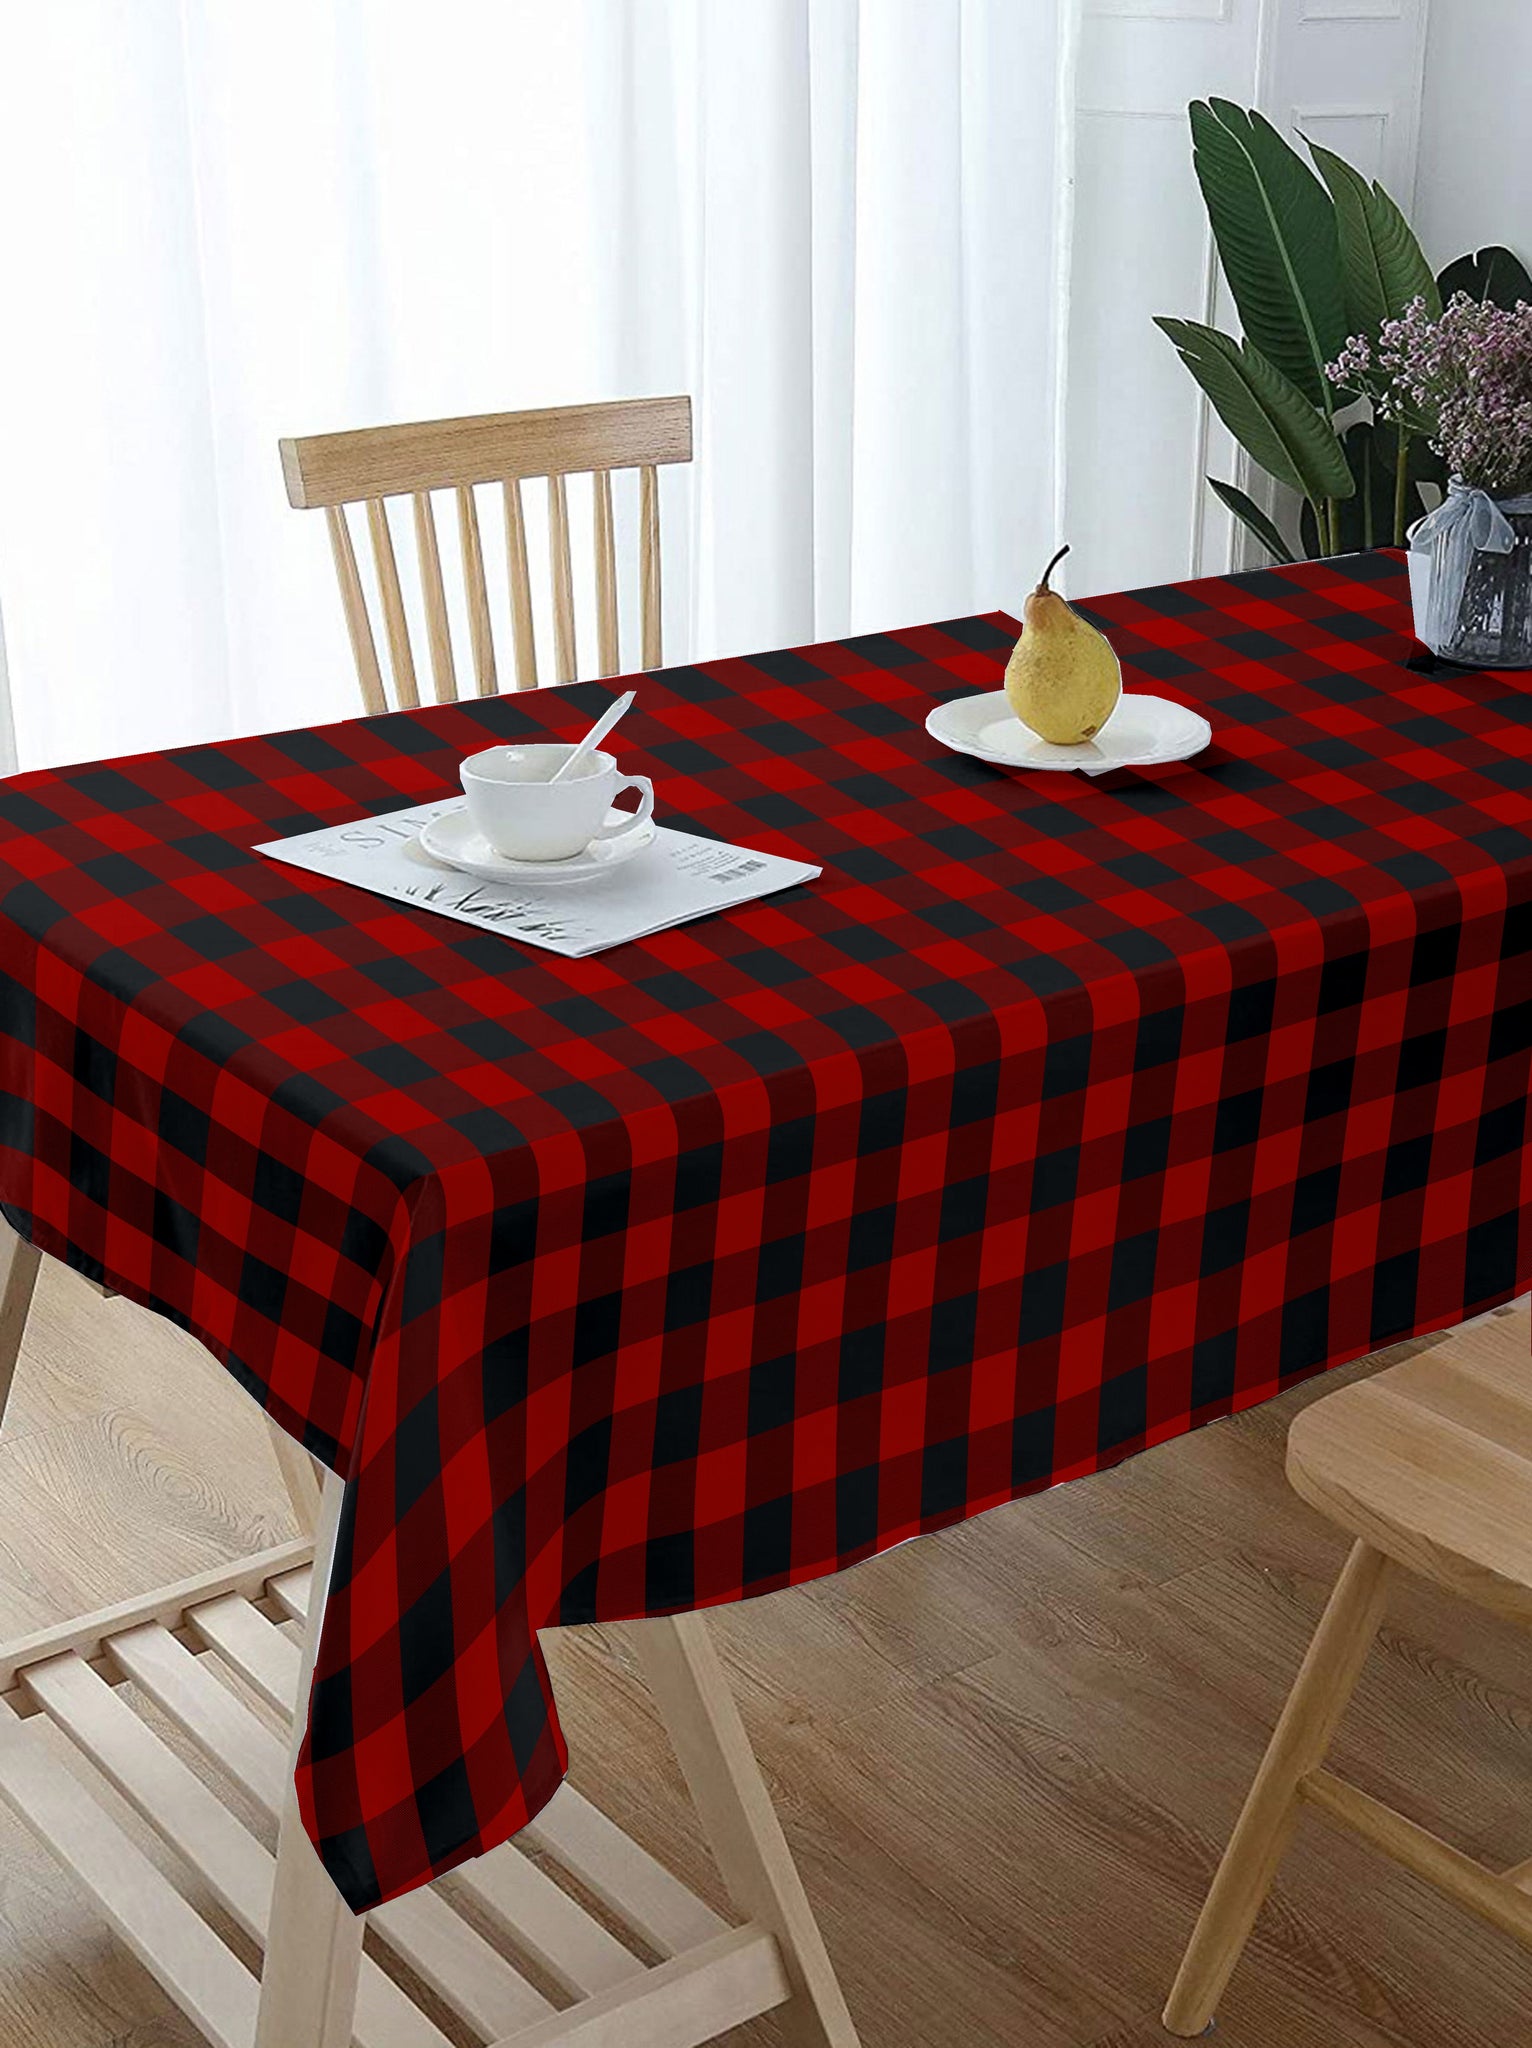 Lushomes table cover, Buffalo Checks Red & Black Plaid Dining Table Cover Cloth, home decor items (Size 36 x 60 Inches , Center Table Cloth)